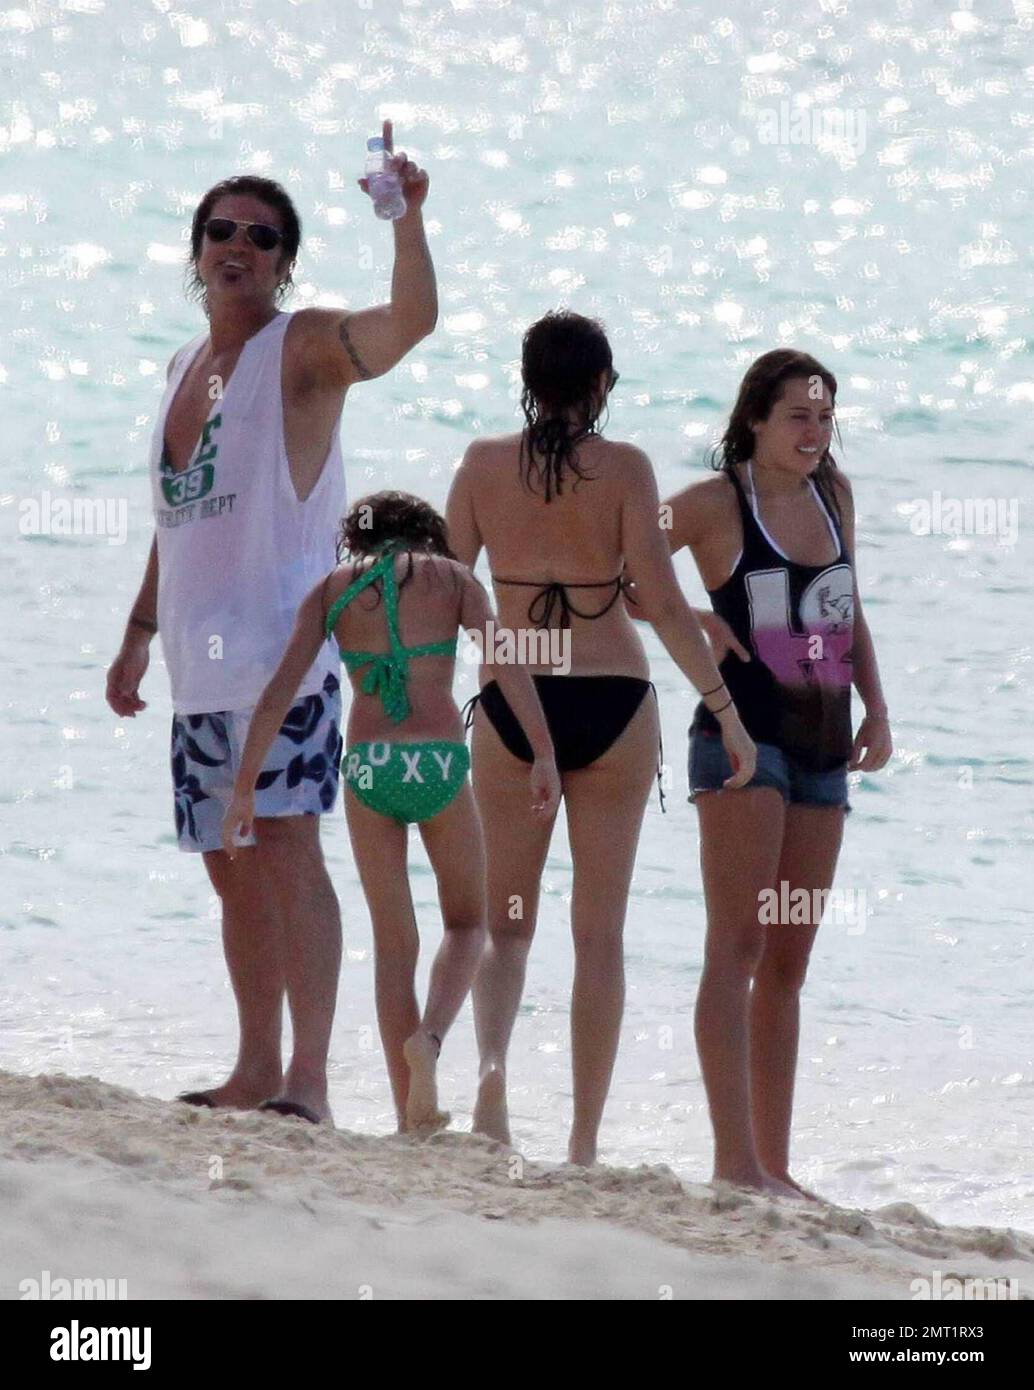 Exclusive!! Miley Cyrus enjoys a day at the beach jetskking with her whole  family on her mother Leticia 'Tish' Cyrus' birthday. The Cyrus family are  enjoying time on an Island in the